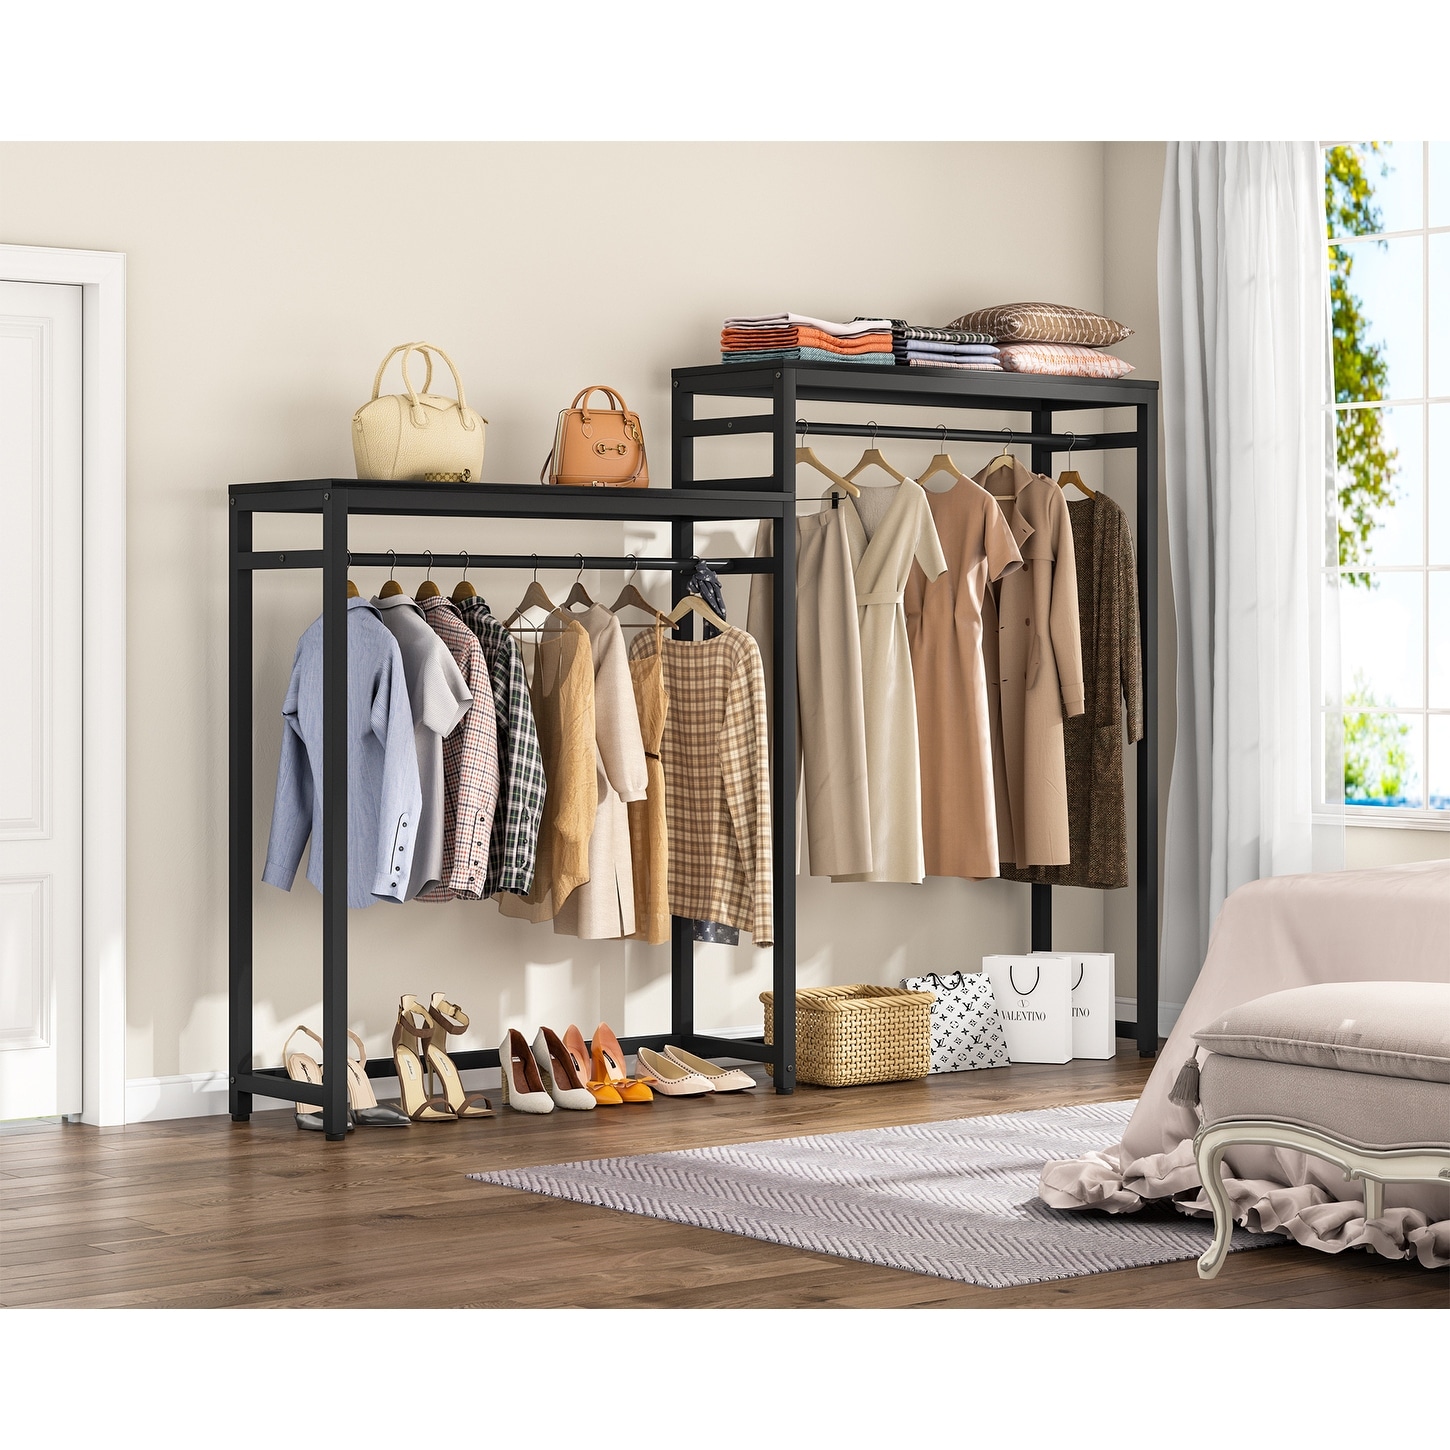 https://ak1.ostkcdn.com/images/products/is/images/direct/8539e155c537d62c98ba58d78616ccb1d594a90b/Tribesigns-Free-Standing-Closet-Organizer%2C-Clothes-Garment-Racks-with-Storage-Shelves-and-Double-Hanging-Rod.jpg